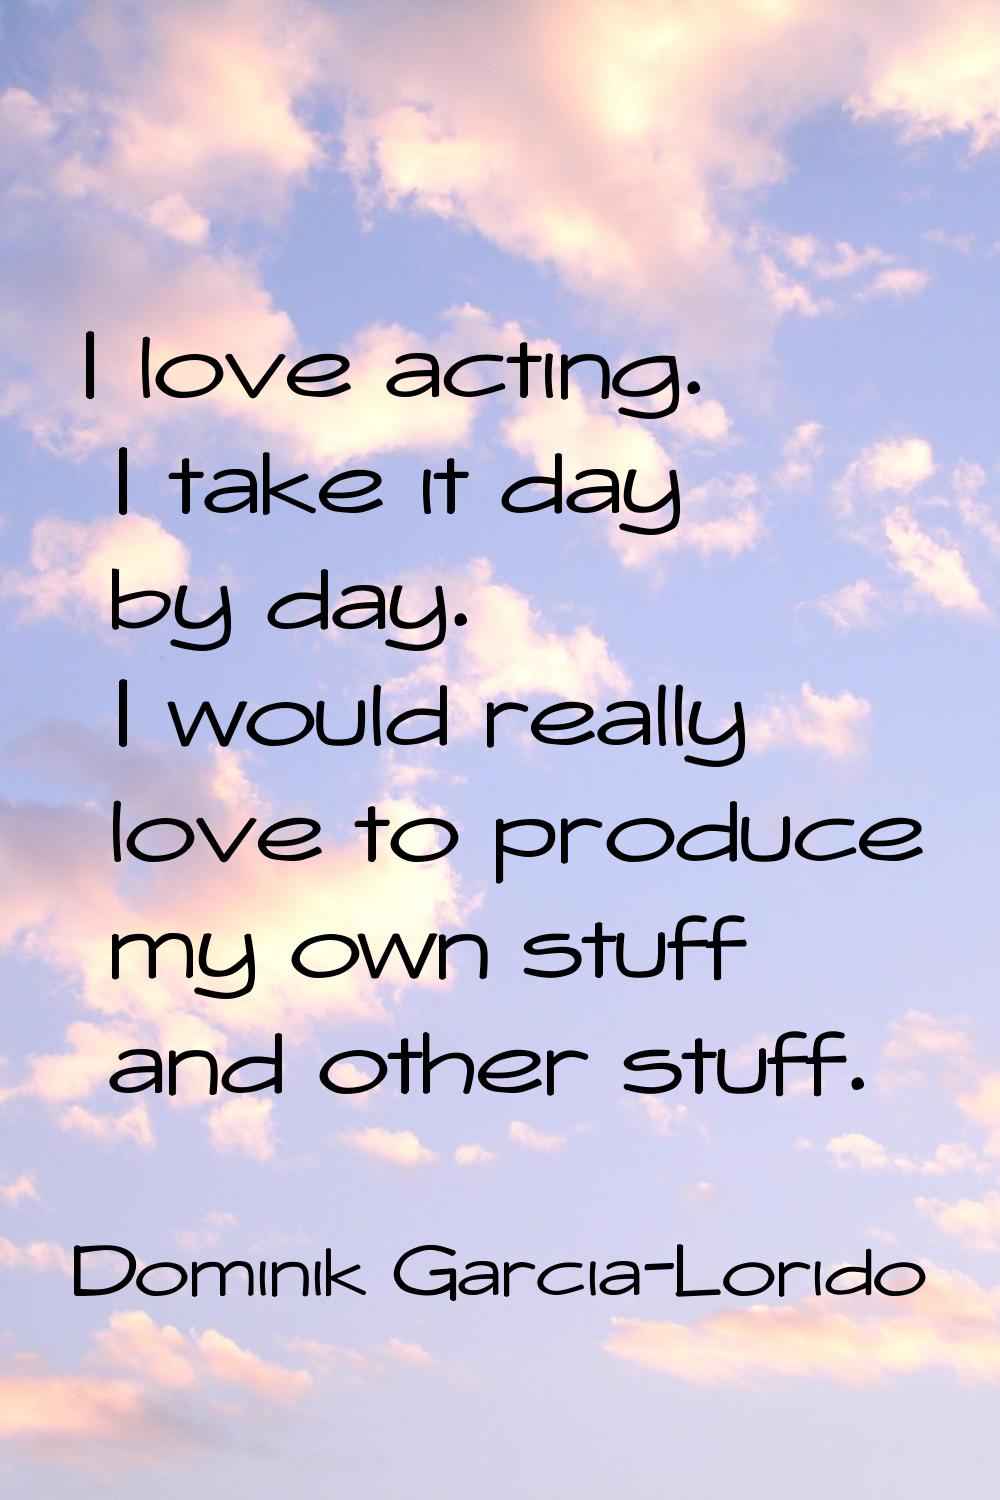 I love acting. I take it day by day. I would really love to produce my own stuff and other stuff.